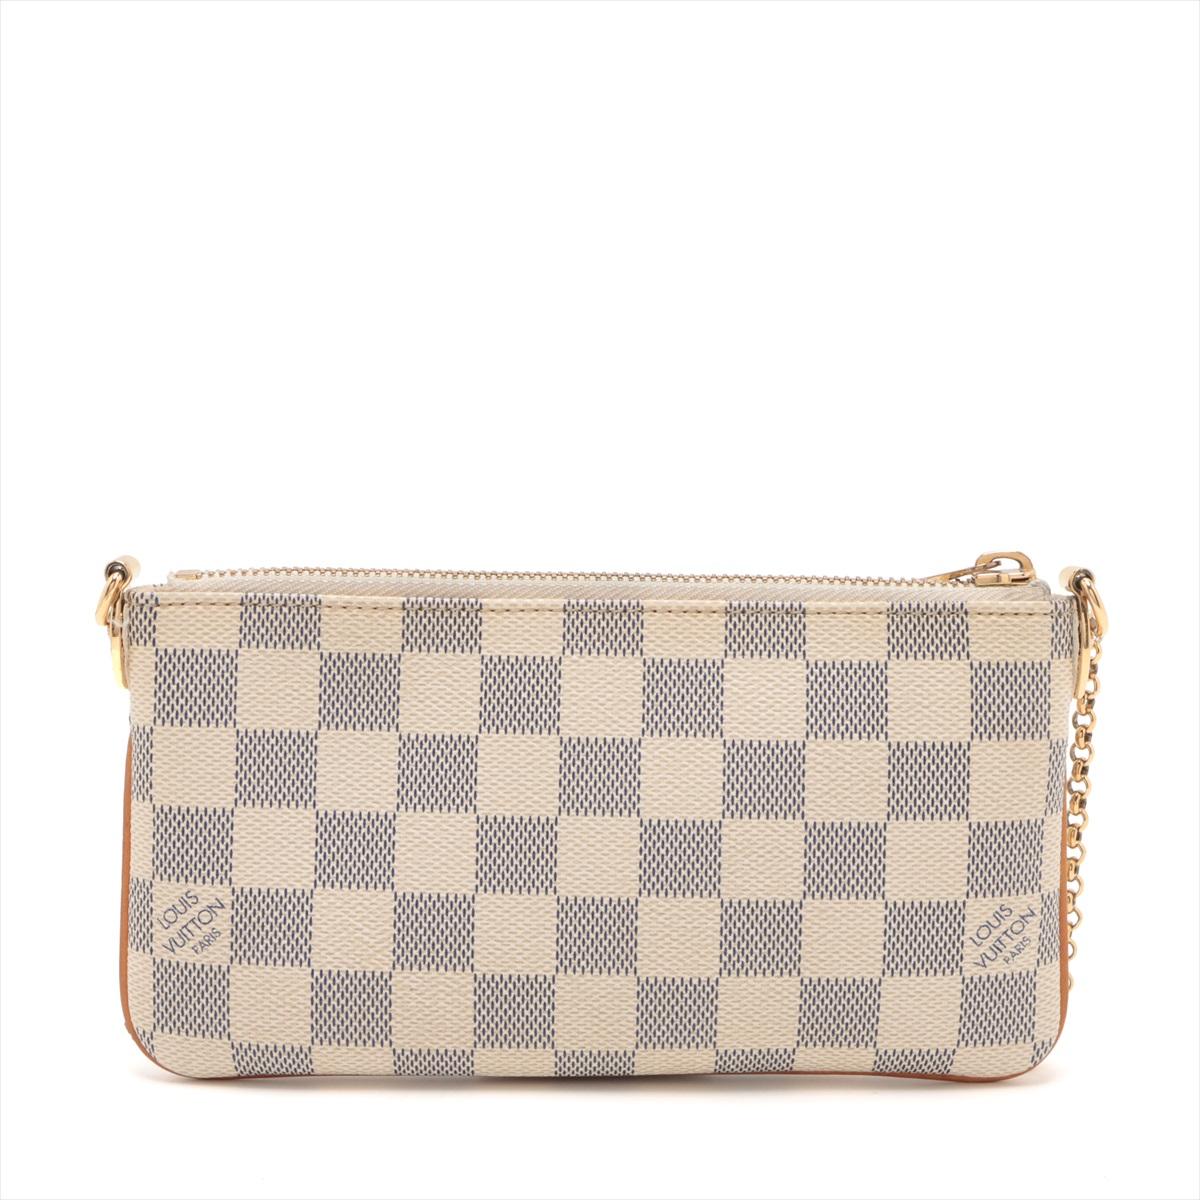 Louis Vuitton Damier Azur Pochette Milla MM In Good Condition For Sale In Indianapolis, IN